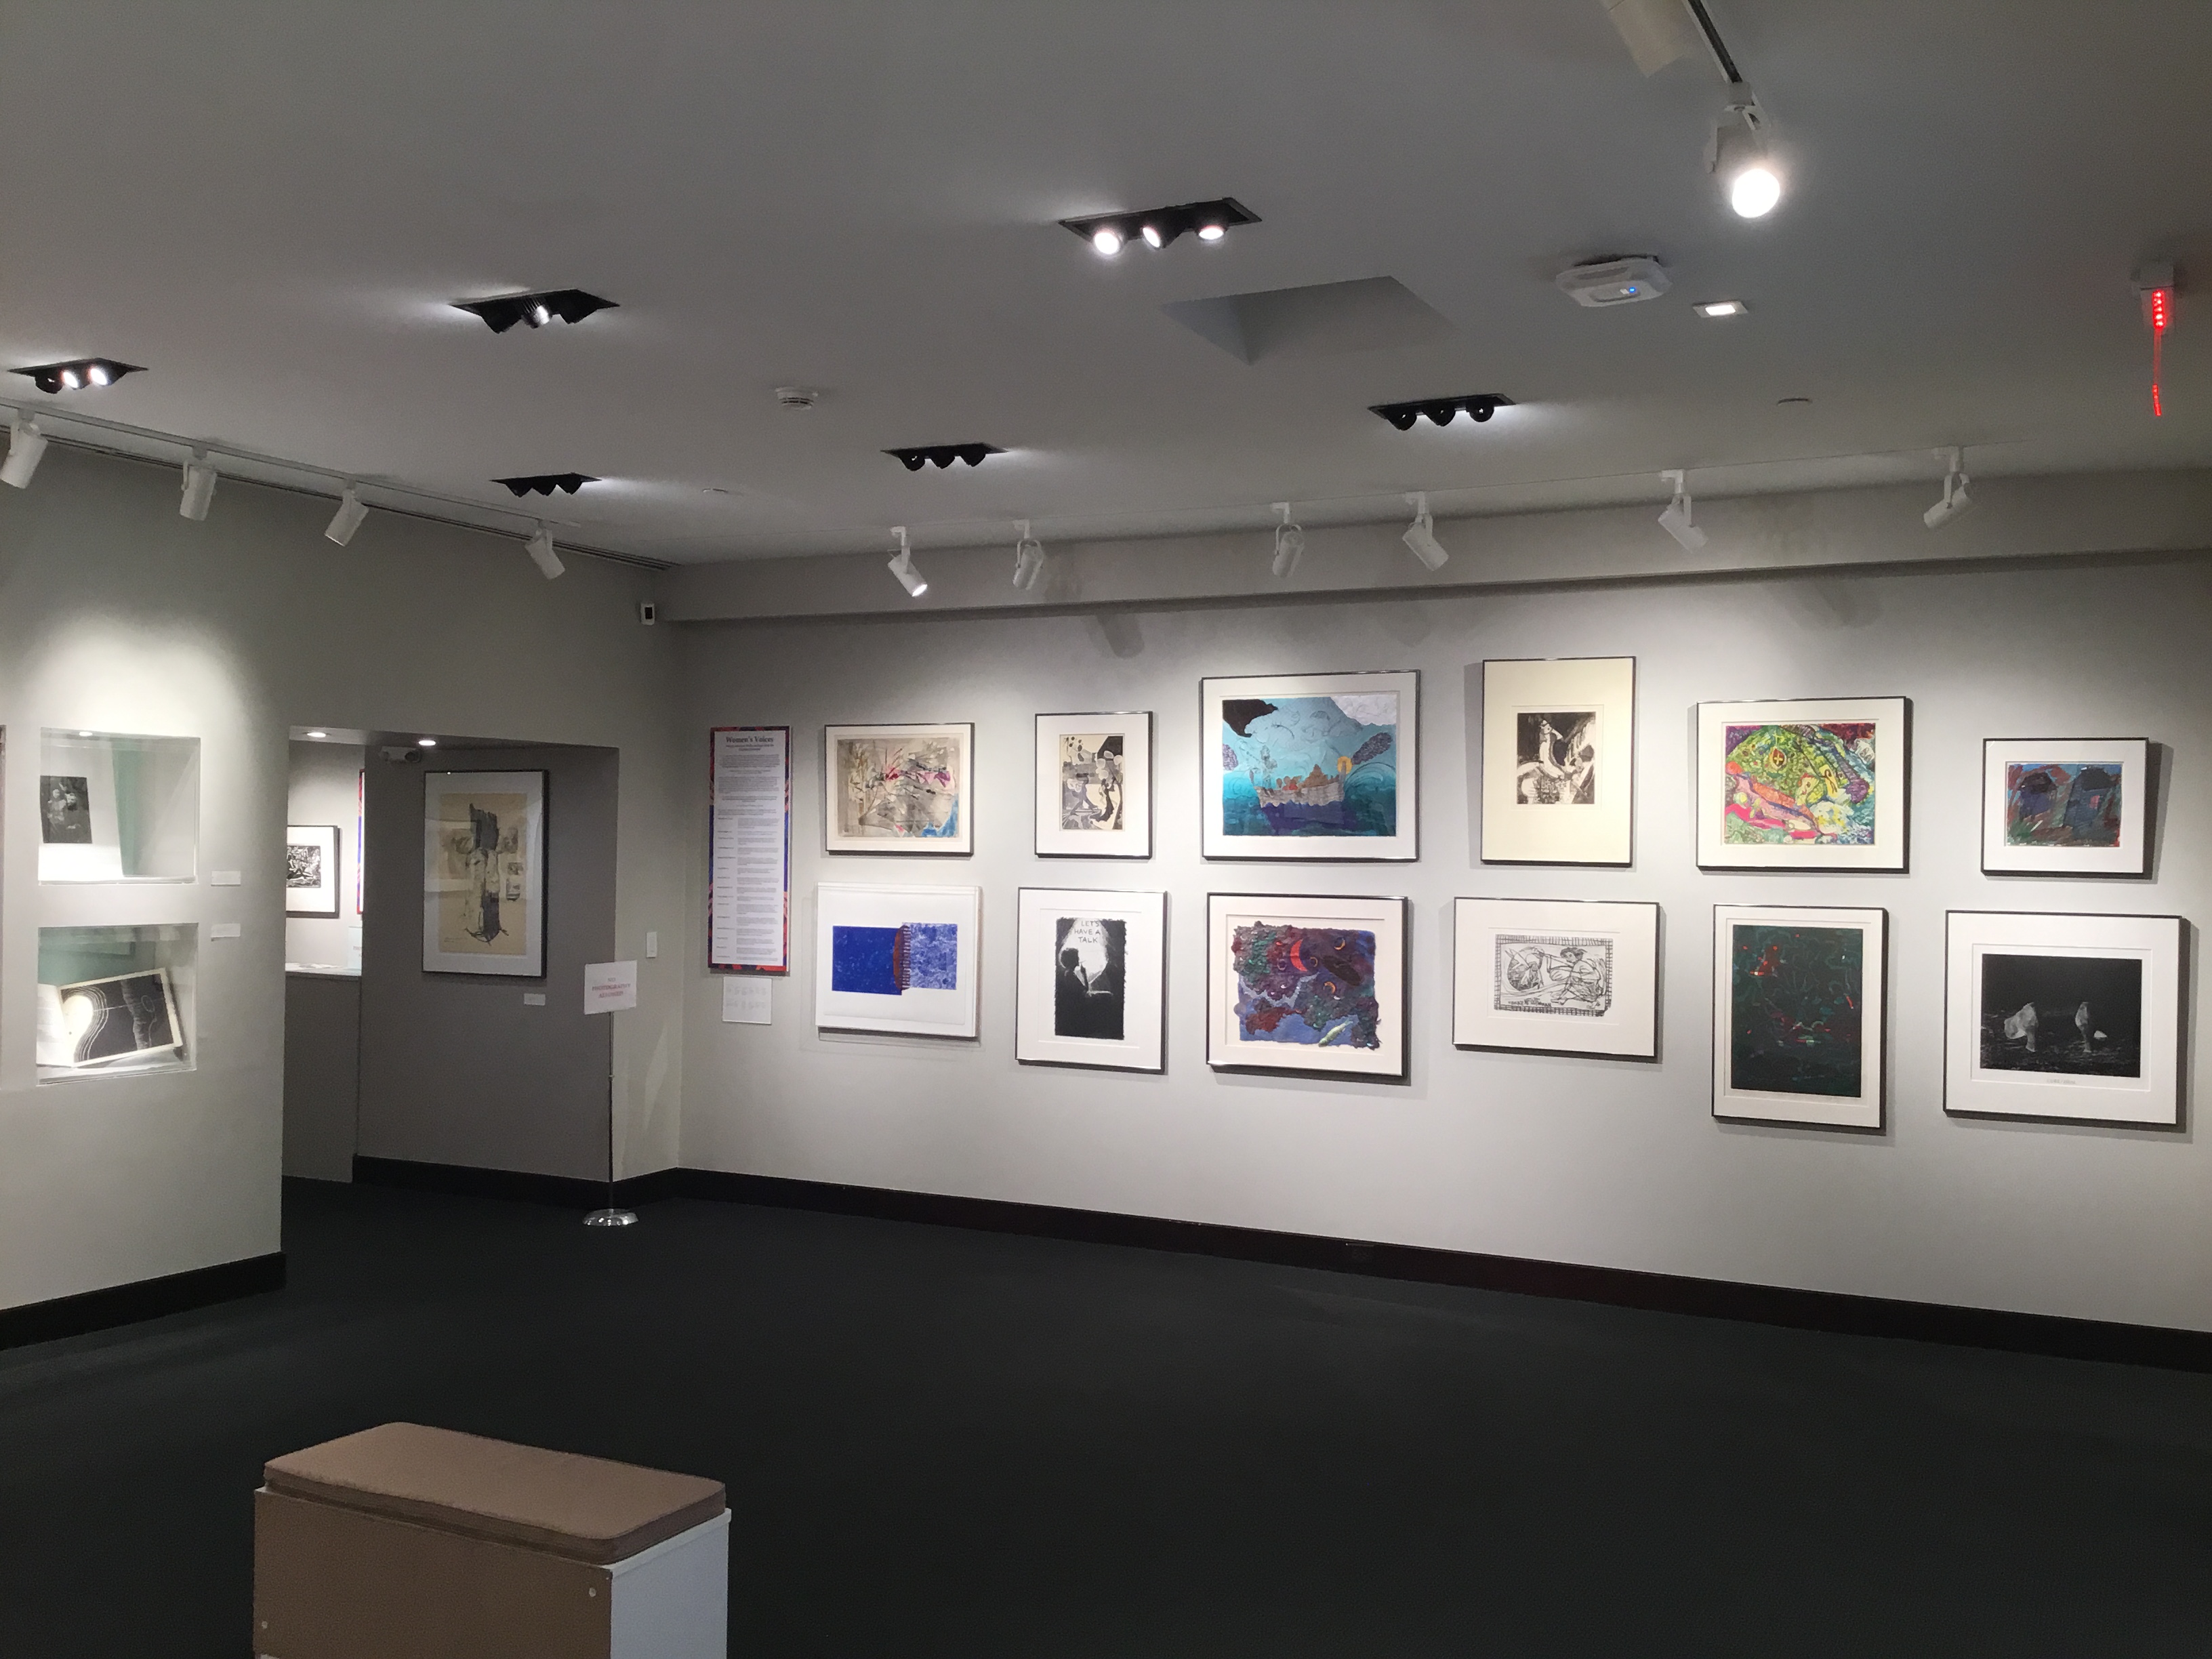 An image of the front corner of the main gallery that features multiple framed pieces, as well as placards that read “A Community of Artists” and “Georgia Artists”.